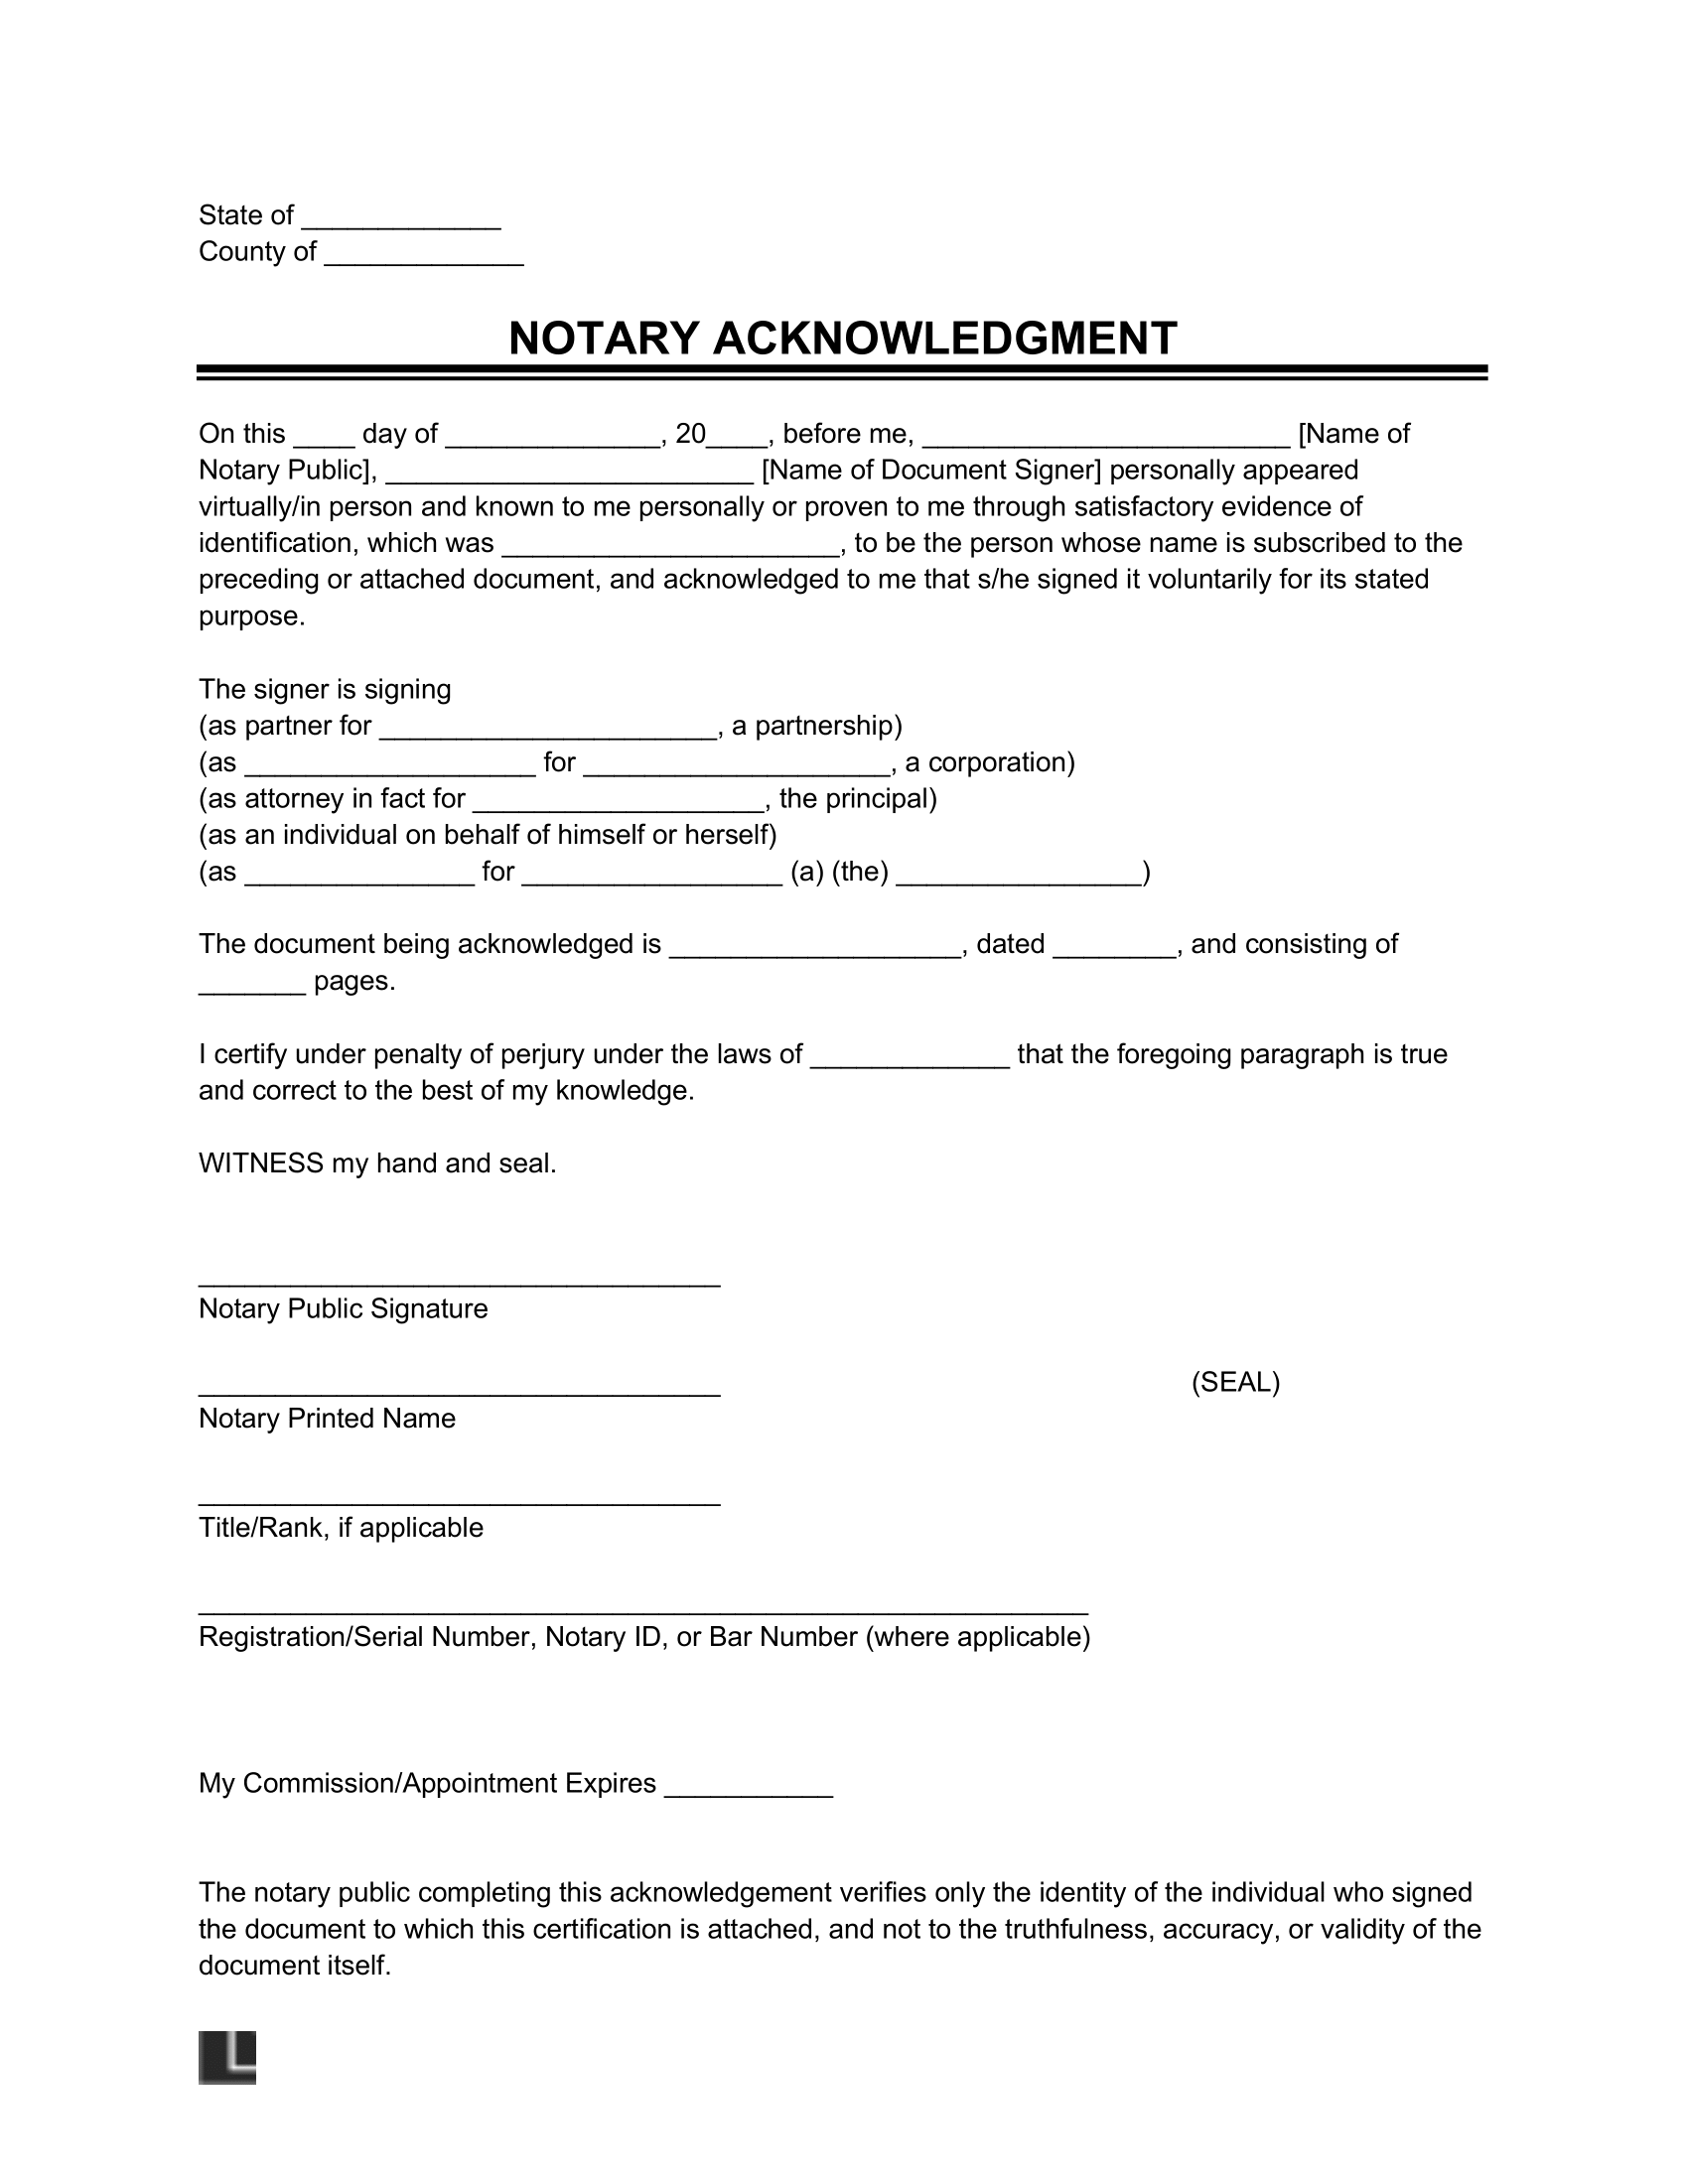 notary acknowledgment template